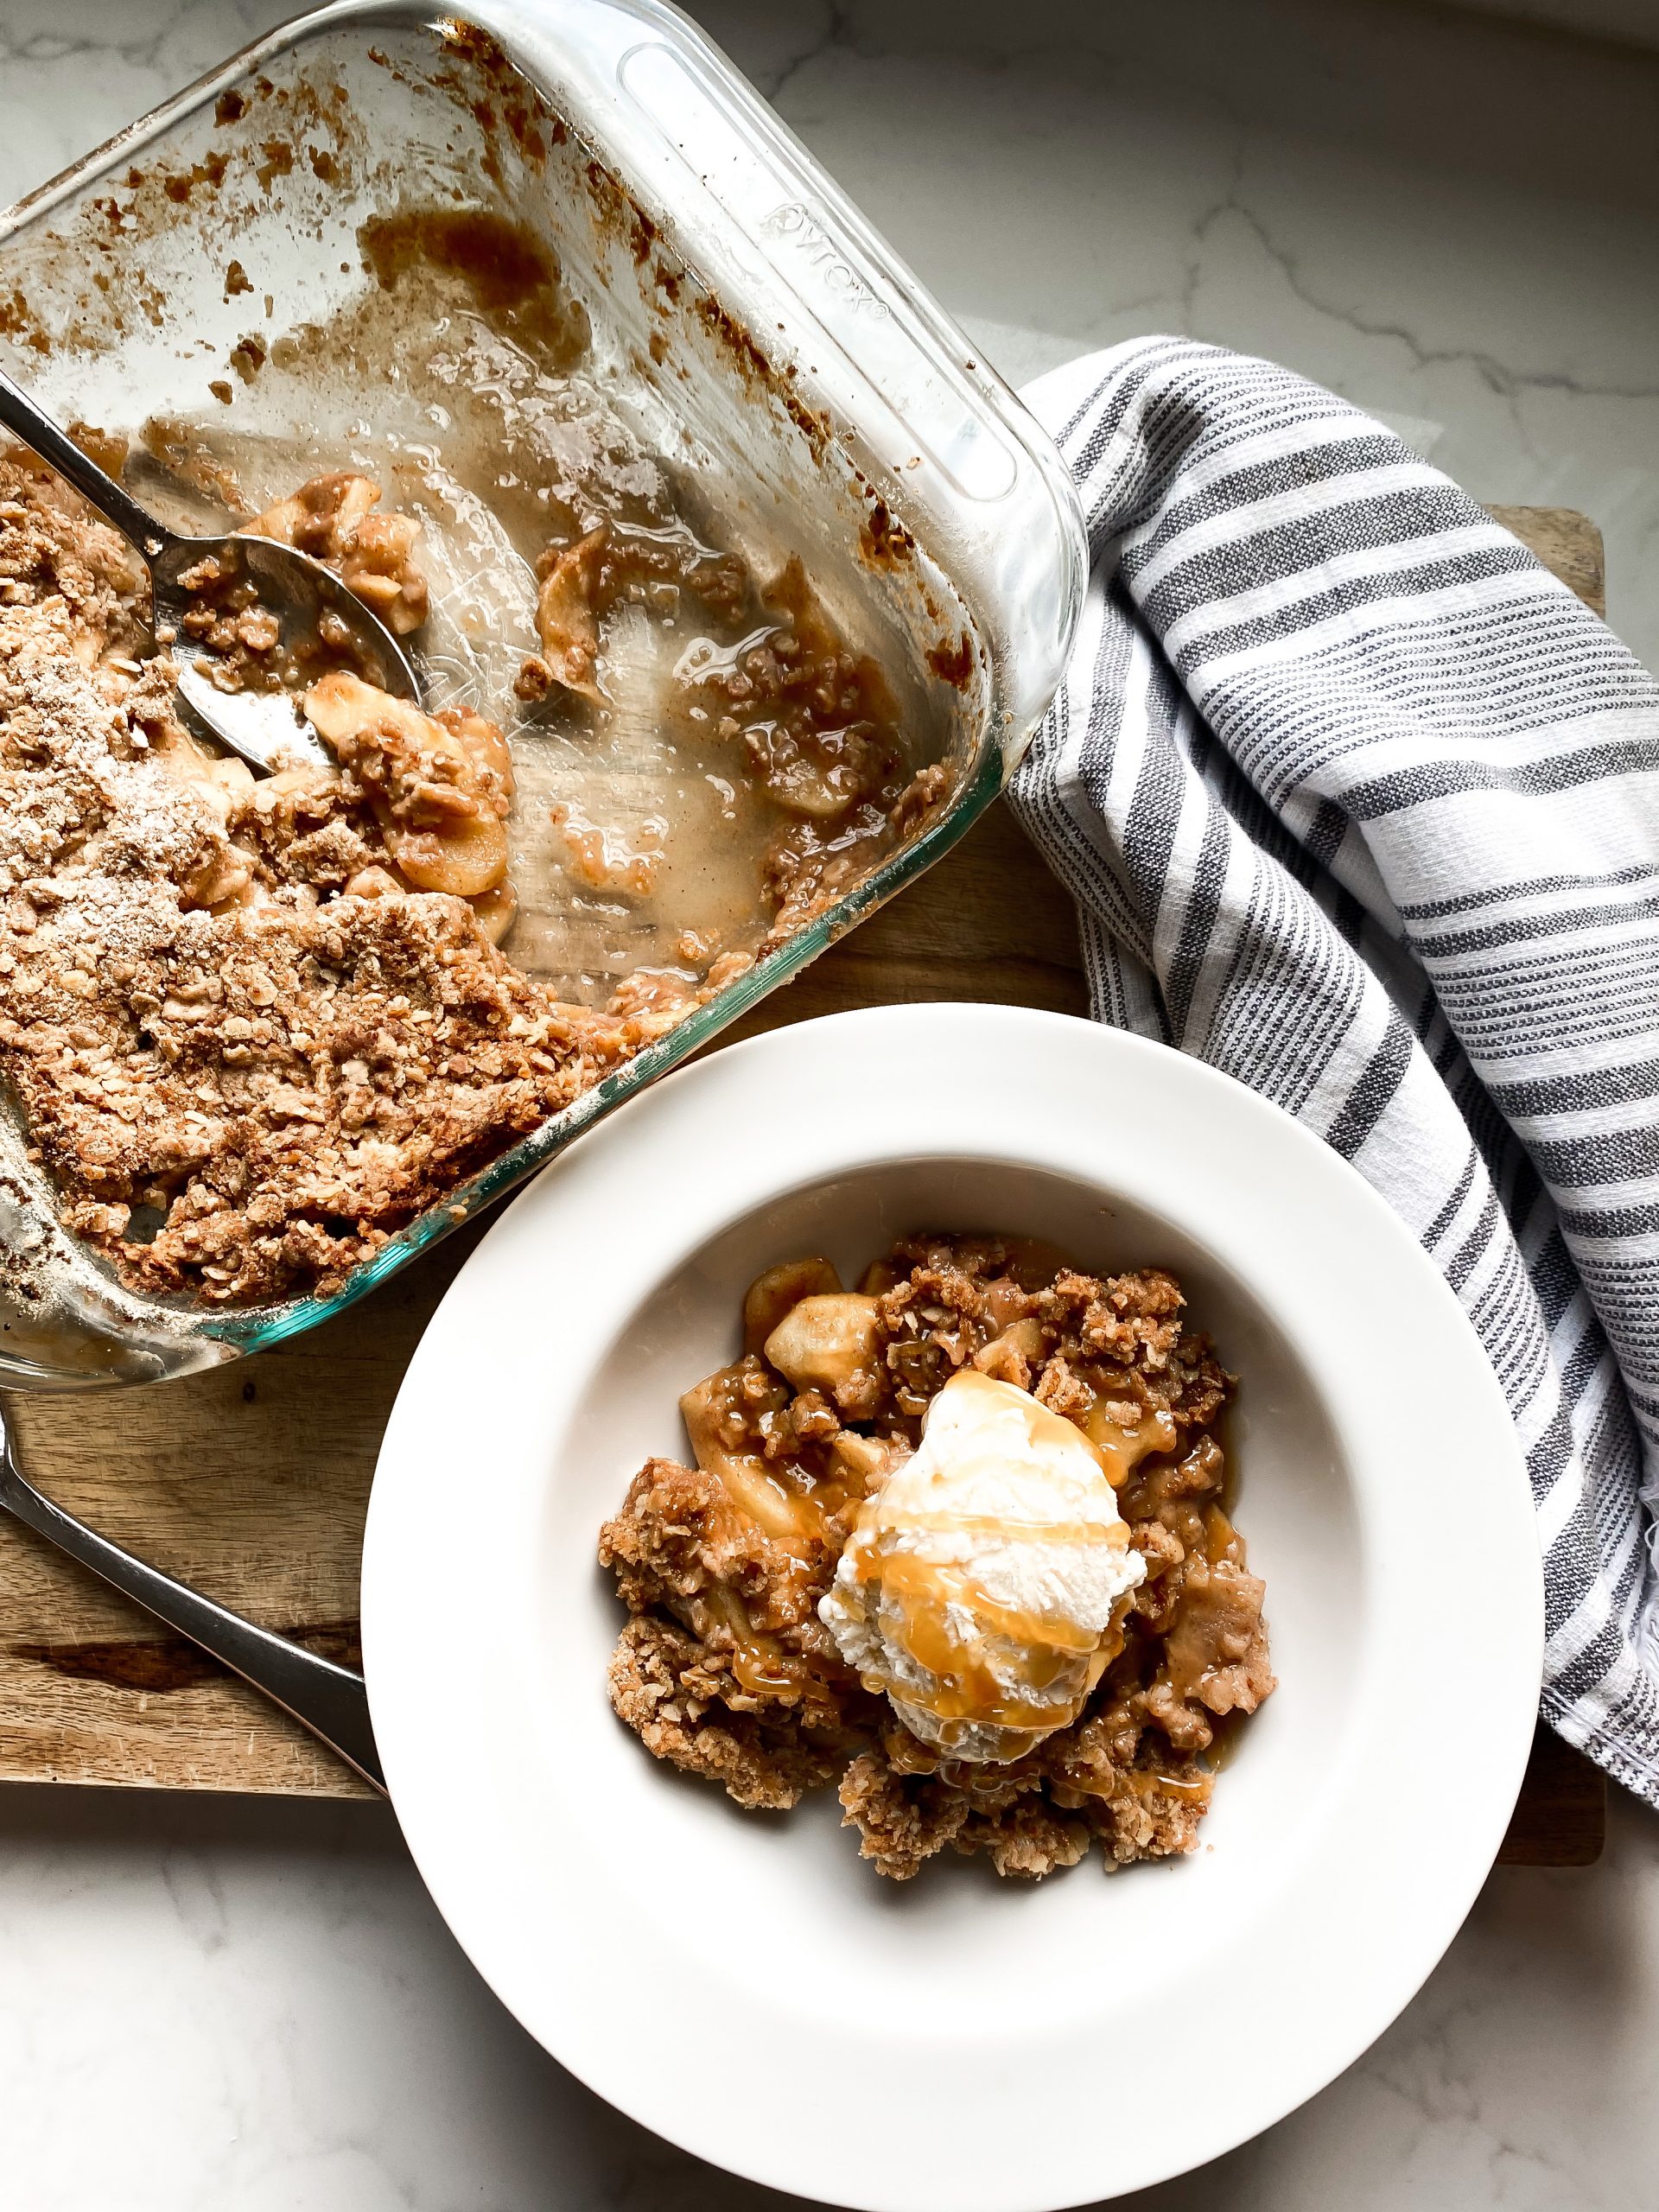 Baked Apple Crumble Recipe